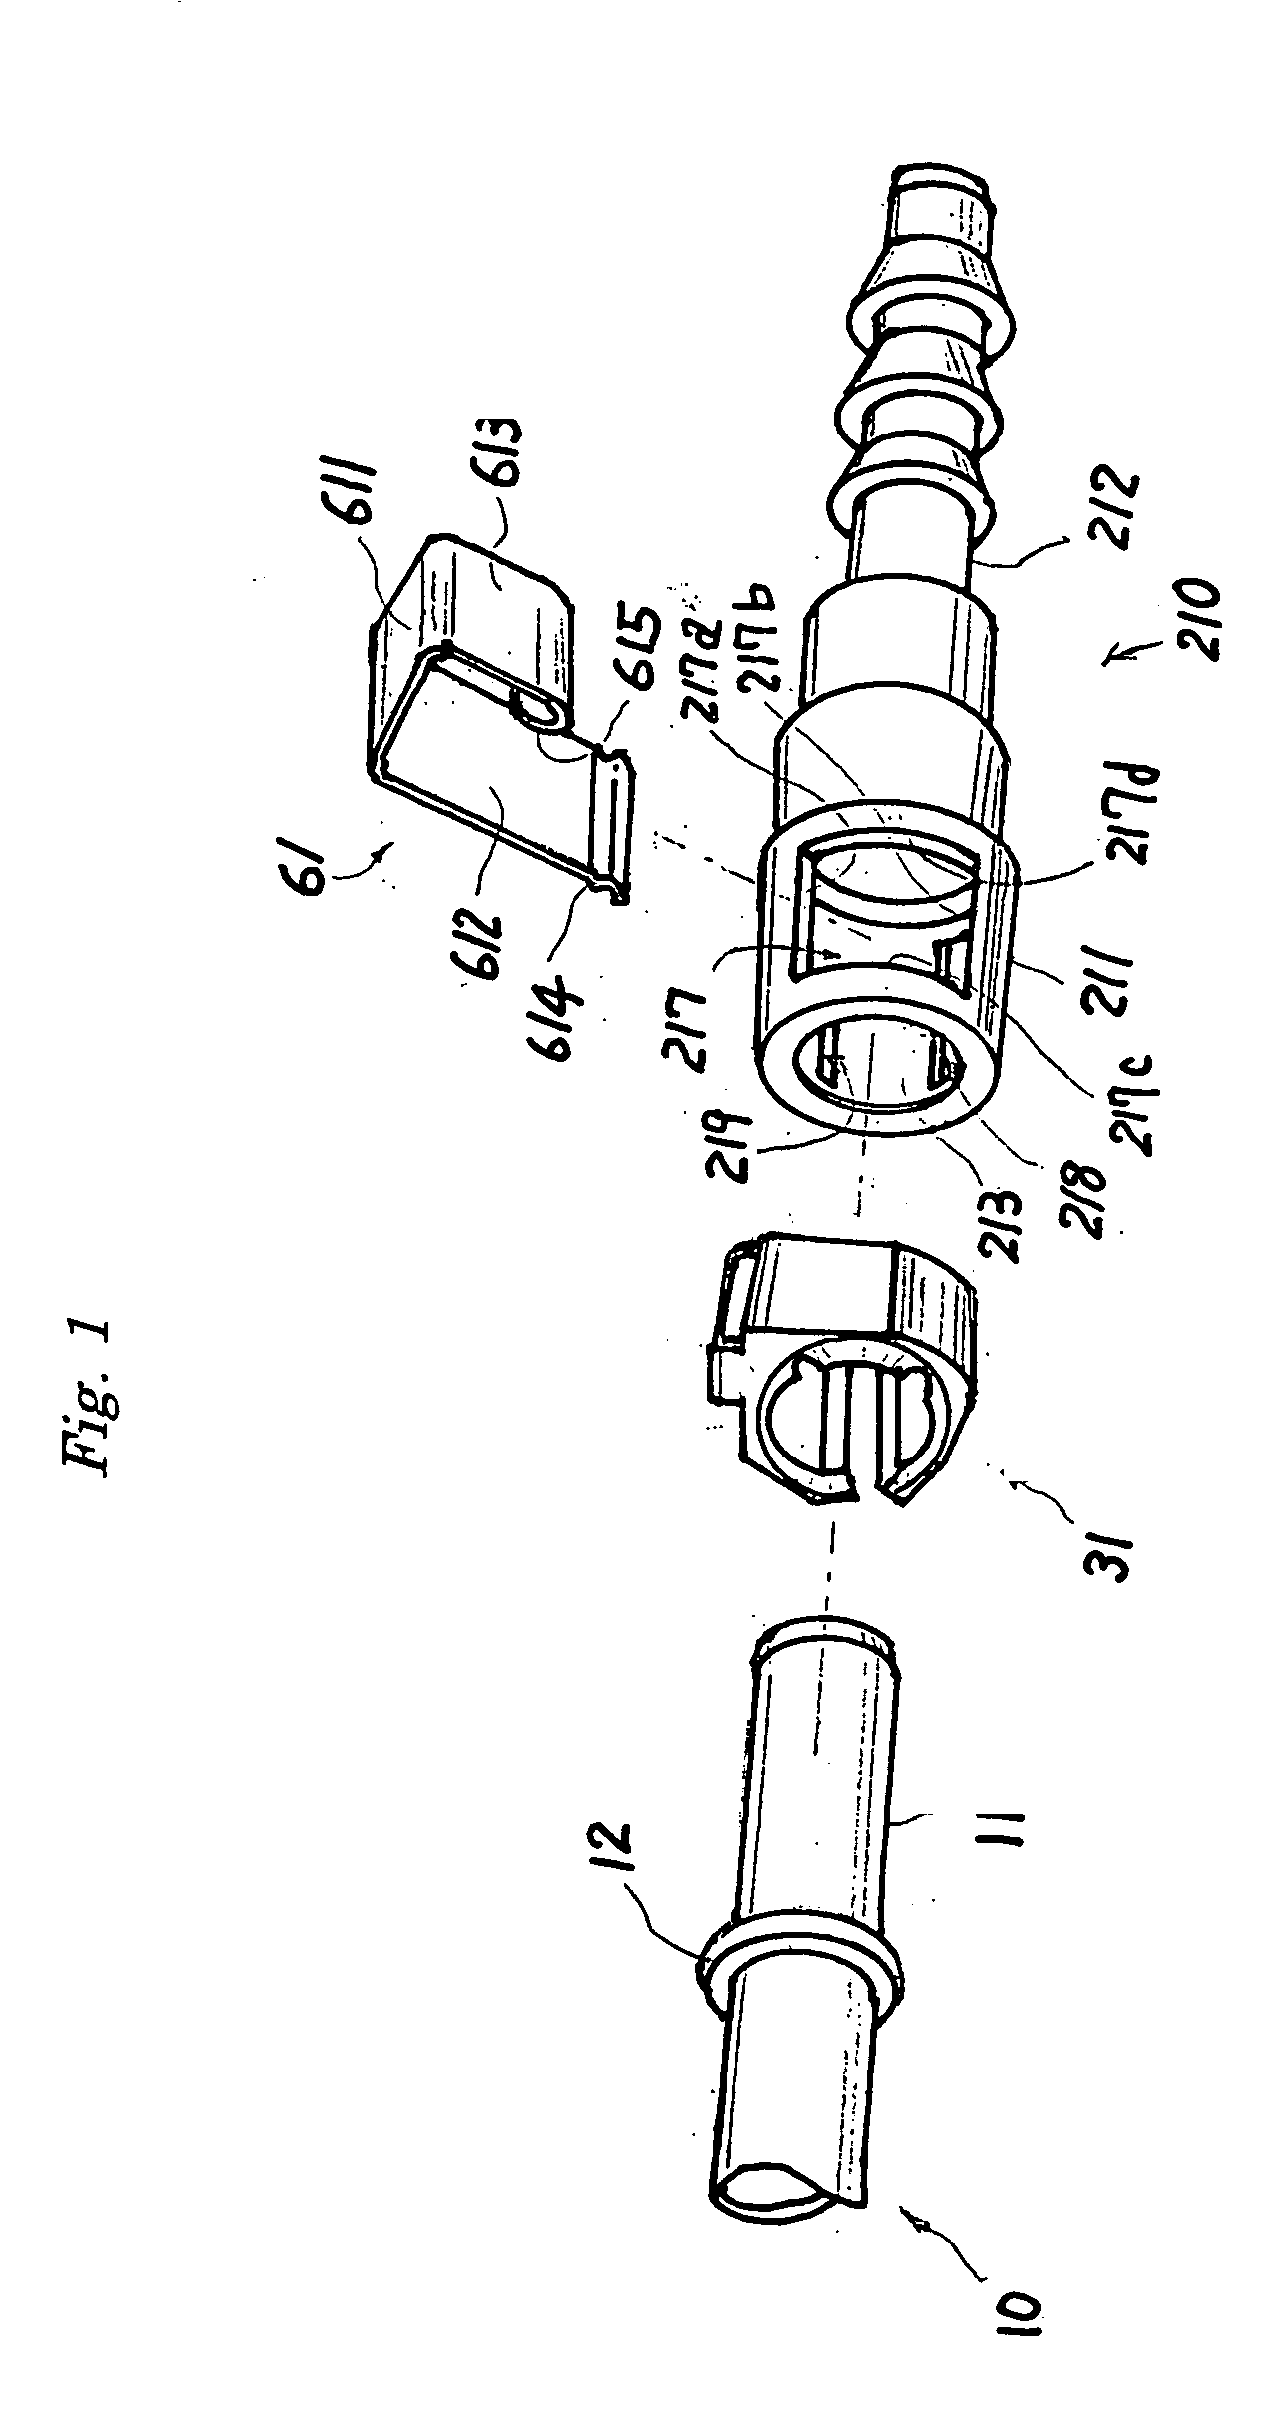 Connector assembly